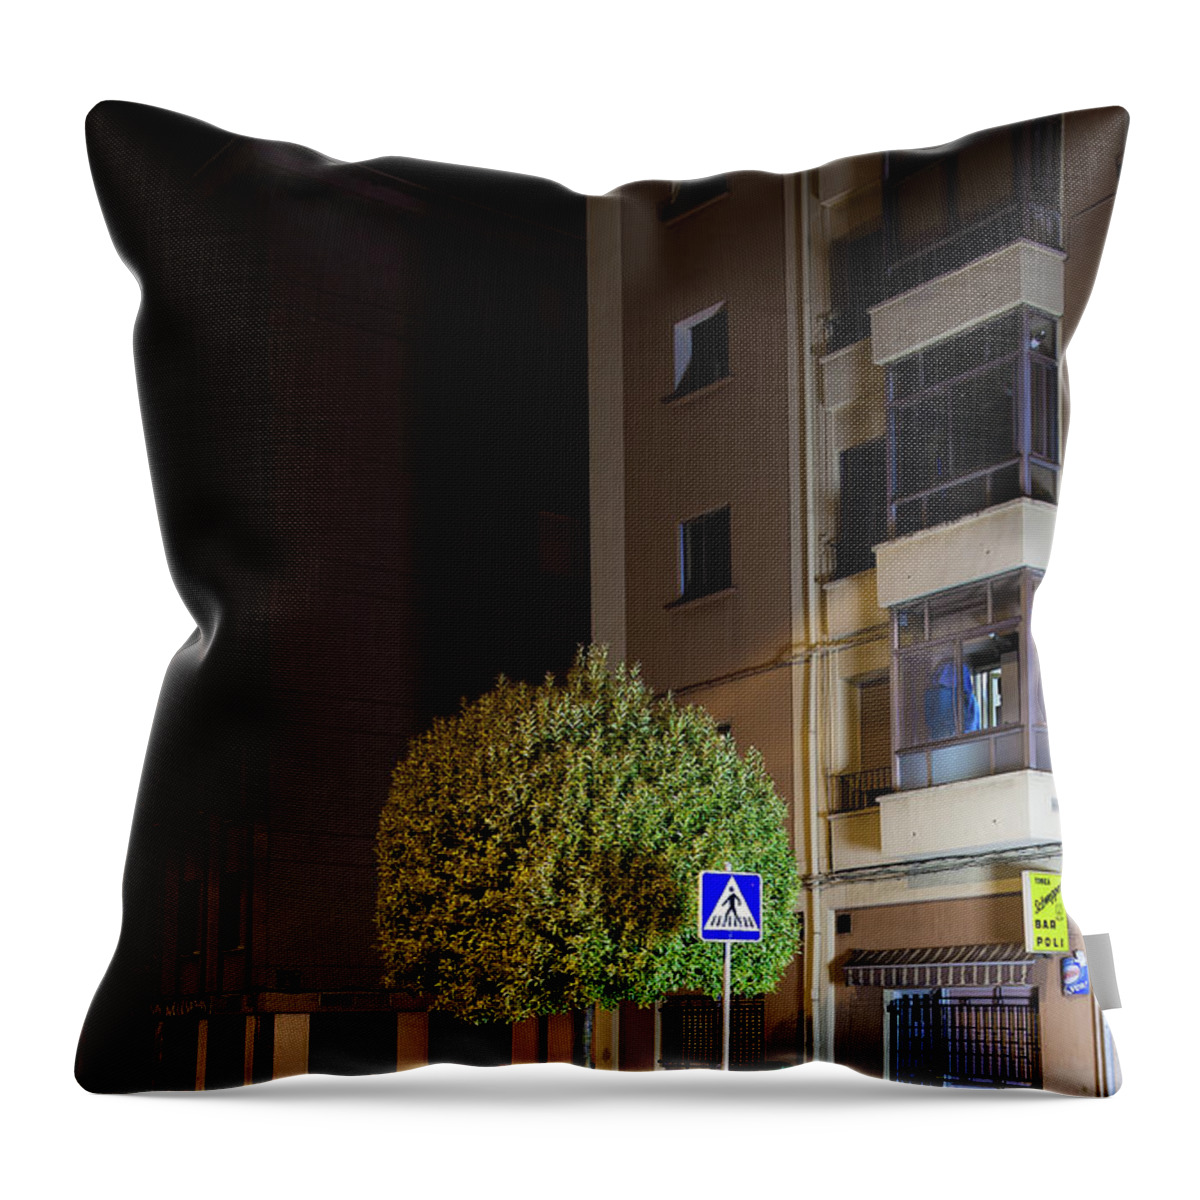 Tranquility Throw Pillow featuring the photograph Tree At Night by Jorge Losada Quintas